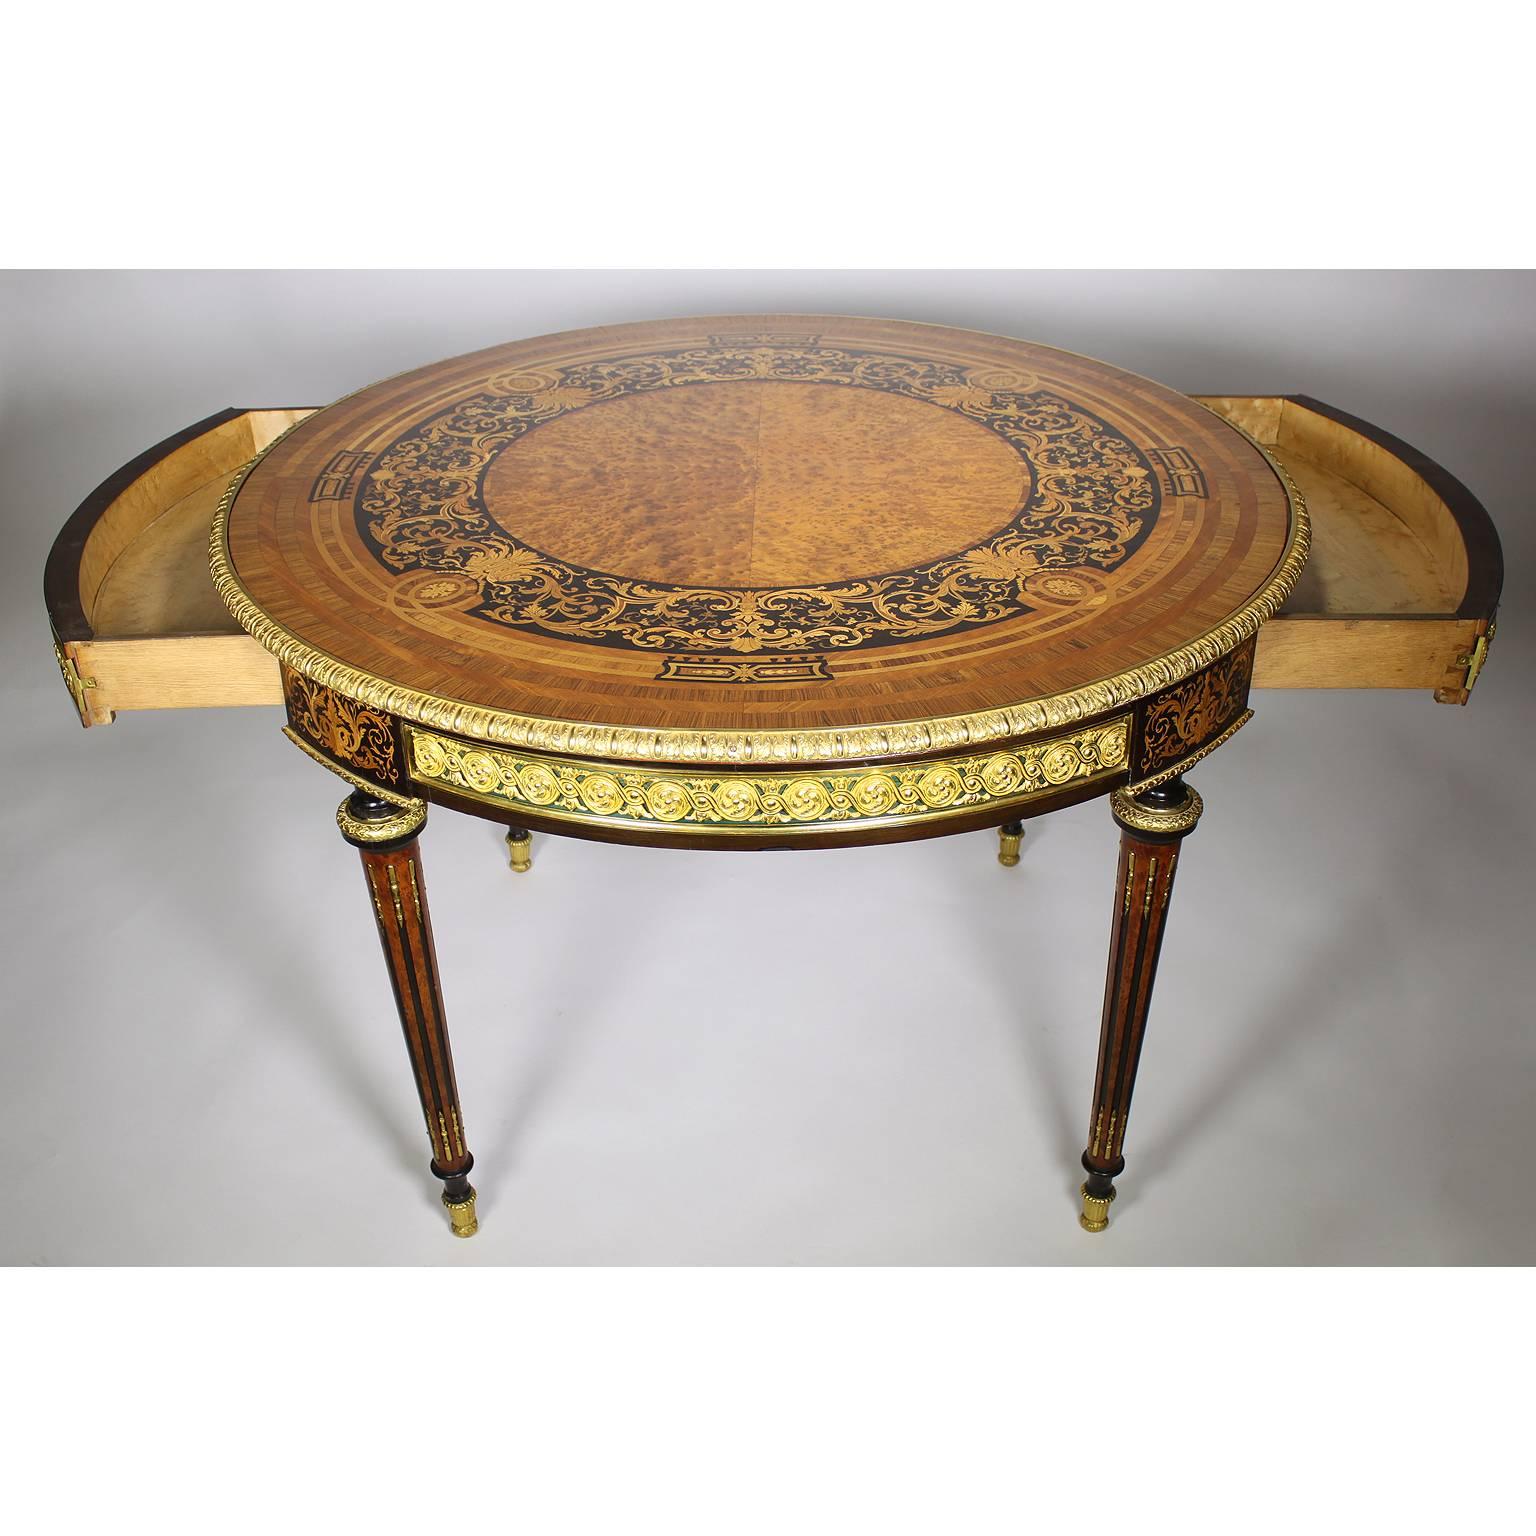 French 19th Century Louis XVI Style Gilt-Bronze Mounted Marquetry Center Table For Sale 4